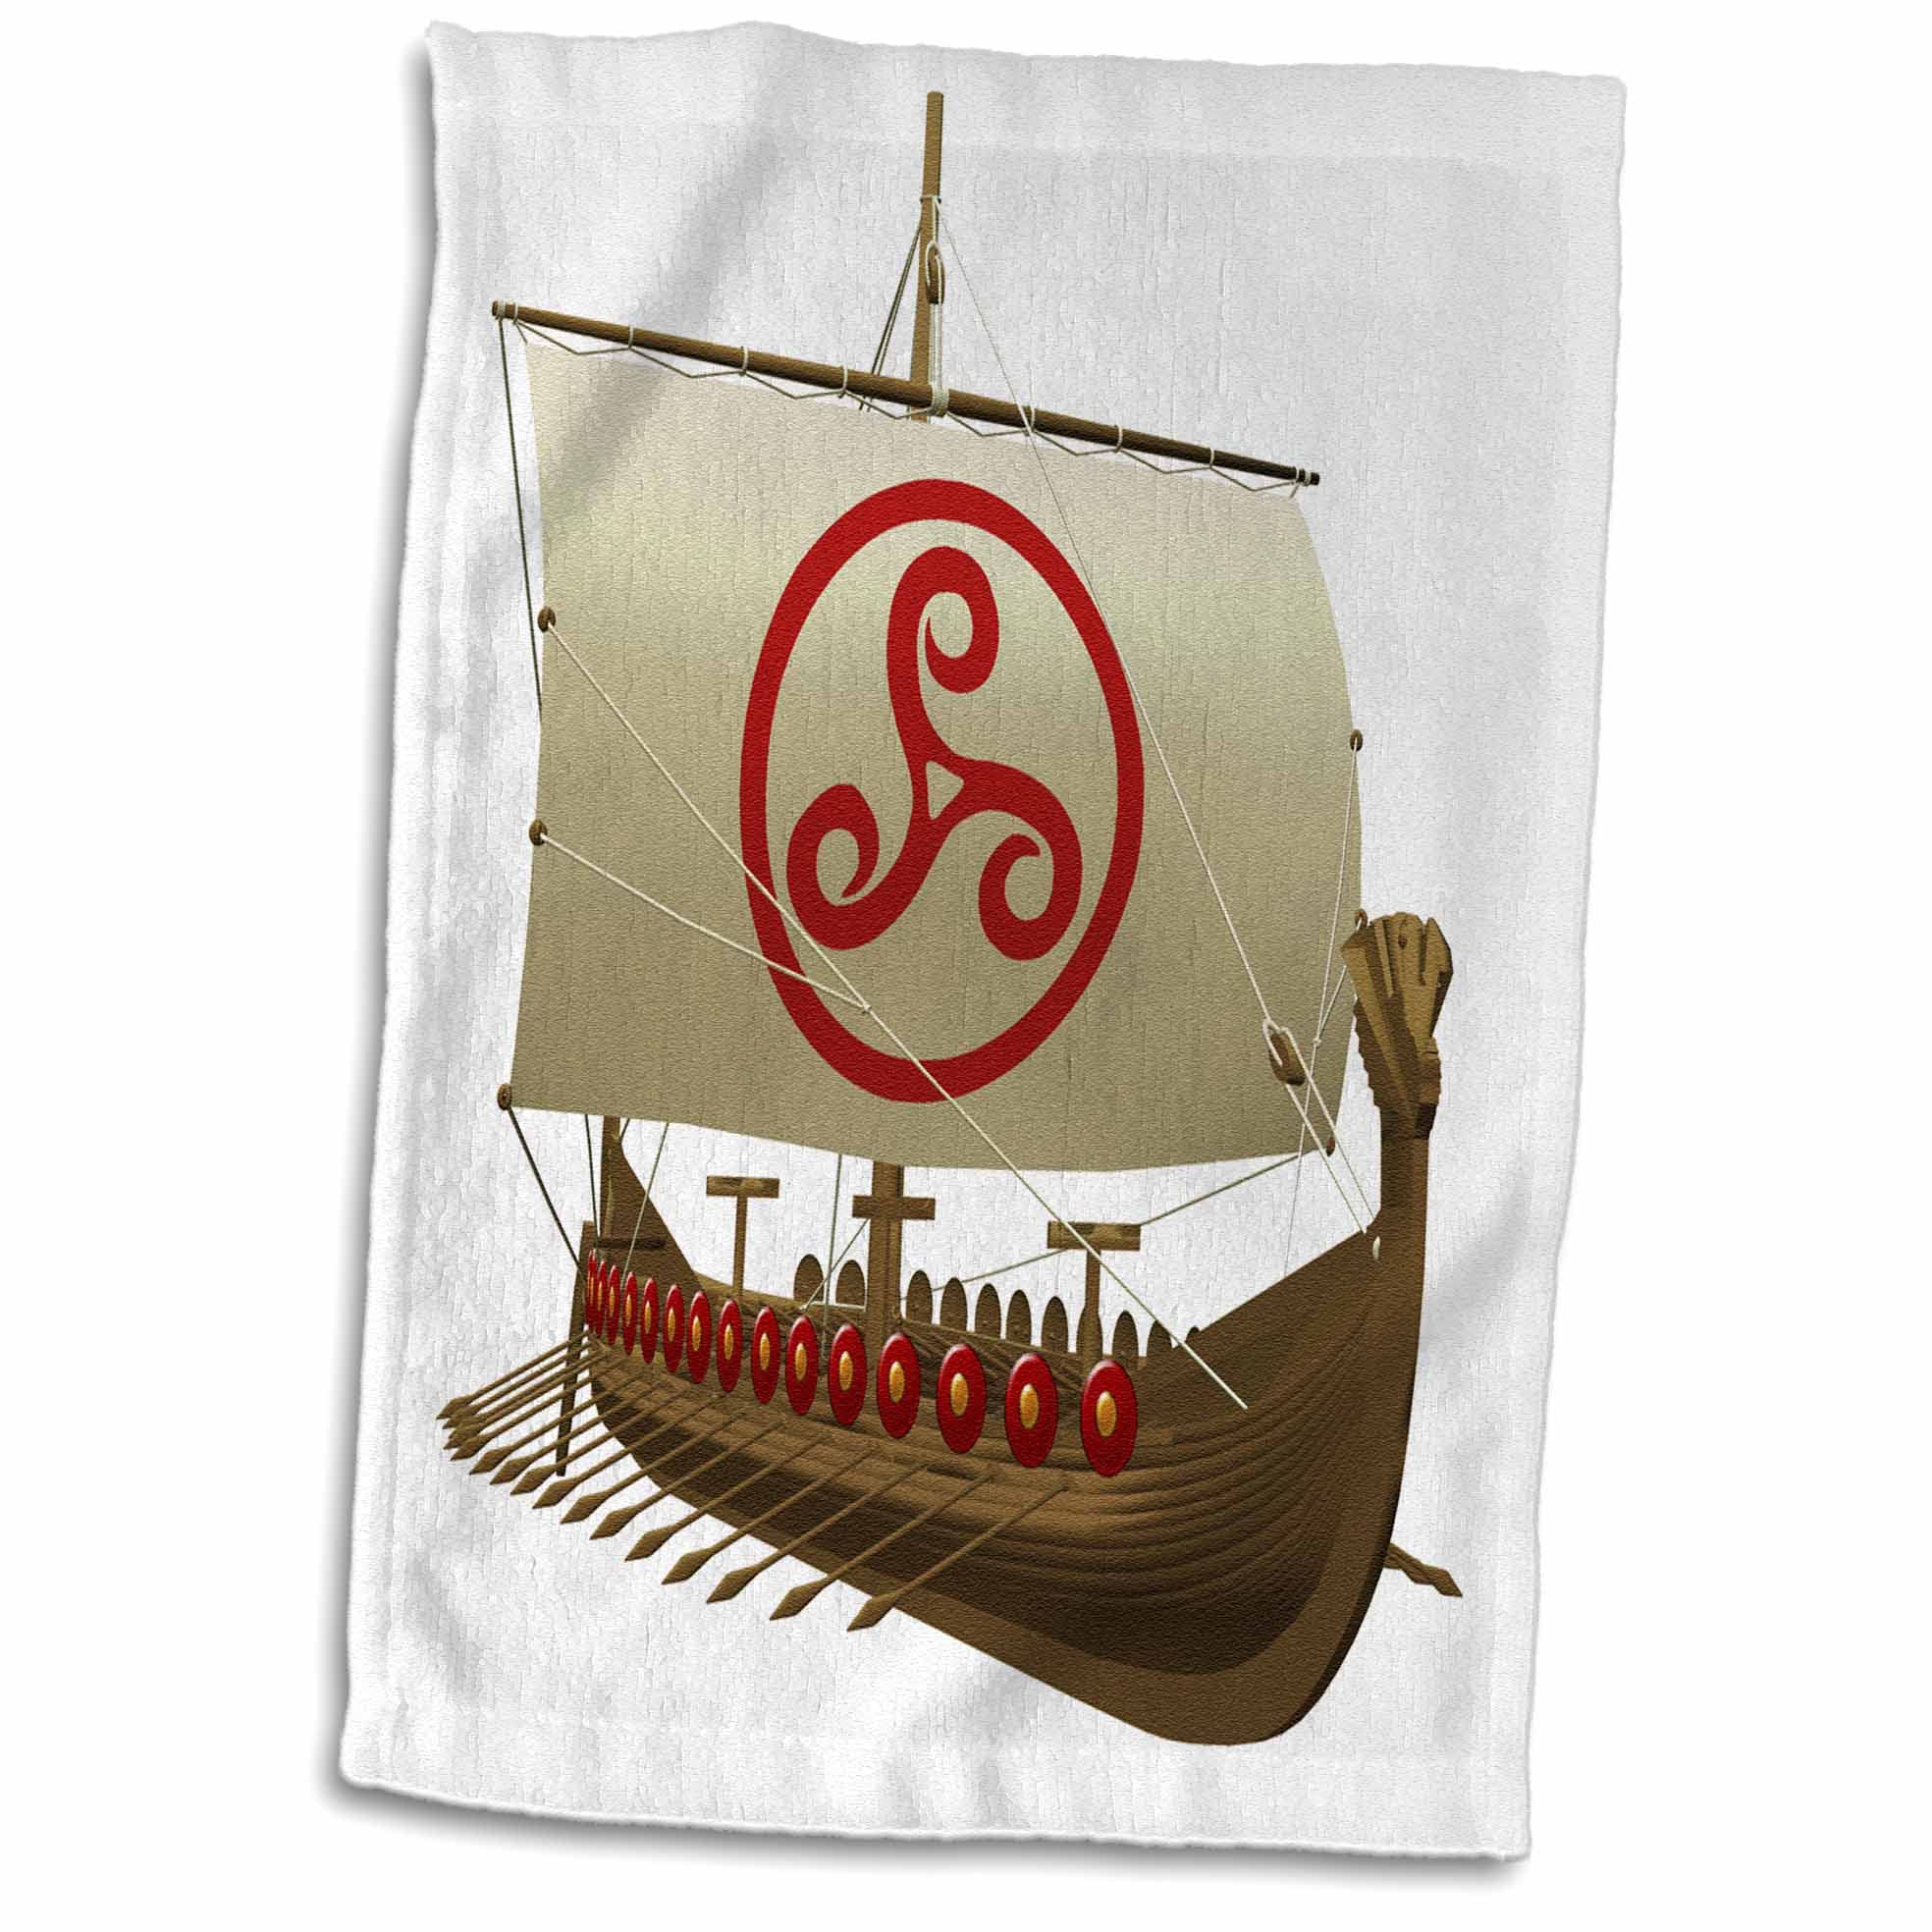 3D Rose A Viking Ship with sail Against a White Background TWL_180529_1 Towel, 15" x 22", Multicolor